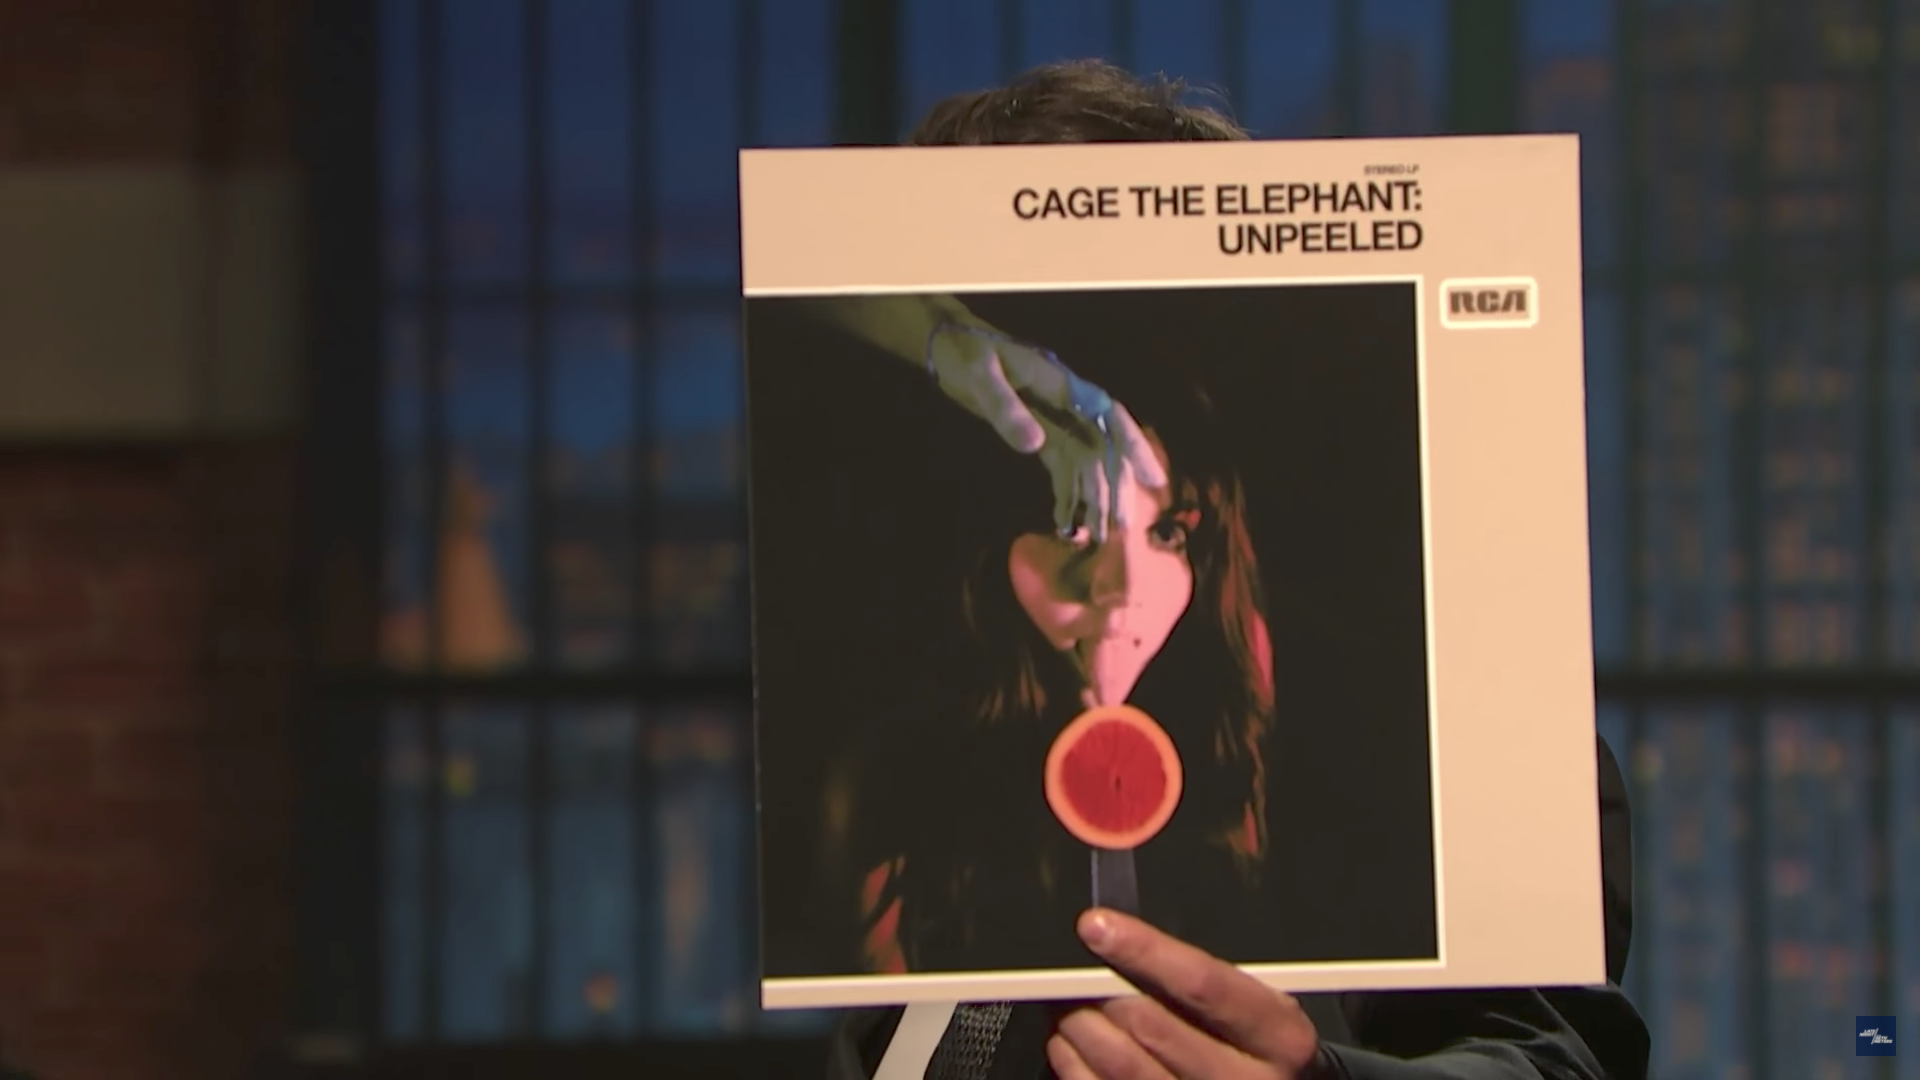 Album cover for 'Unpeeled' by Cage the Elephant. Photo by: Late Night with Seth Myers / YouTube